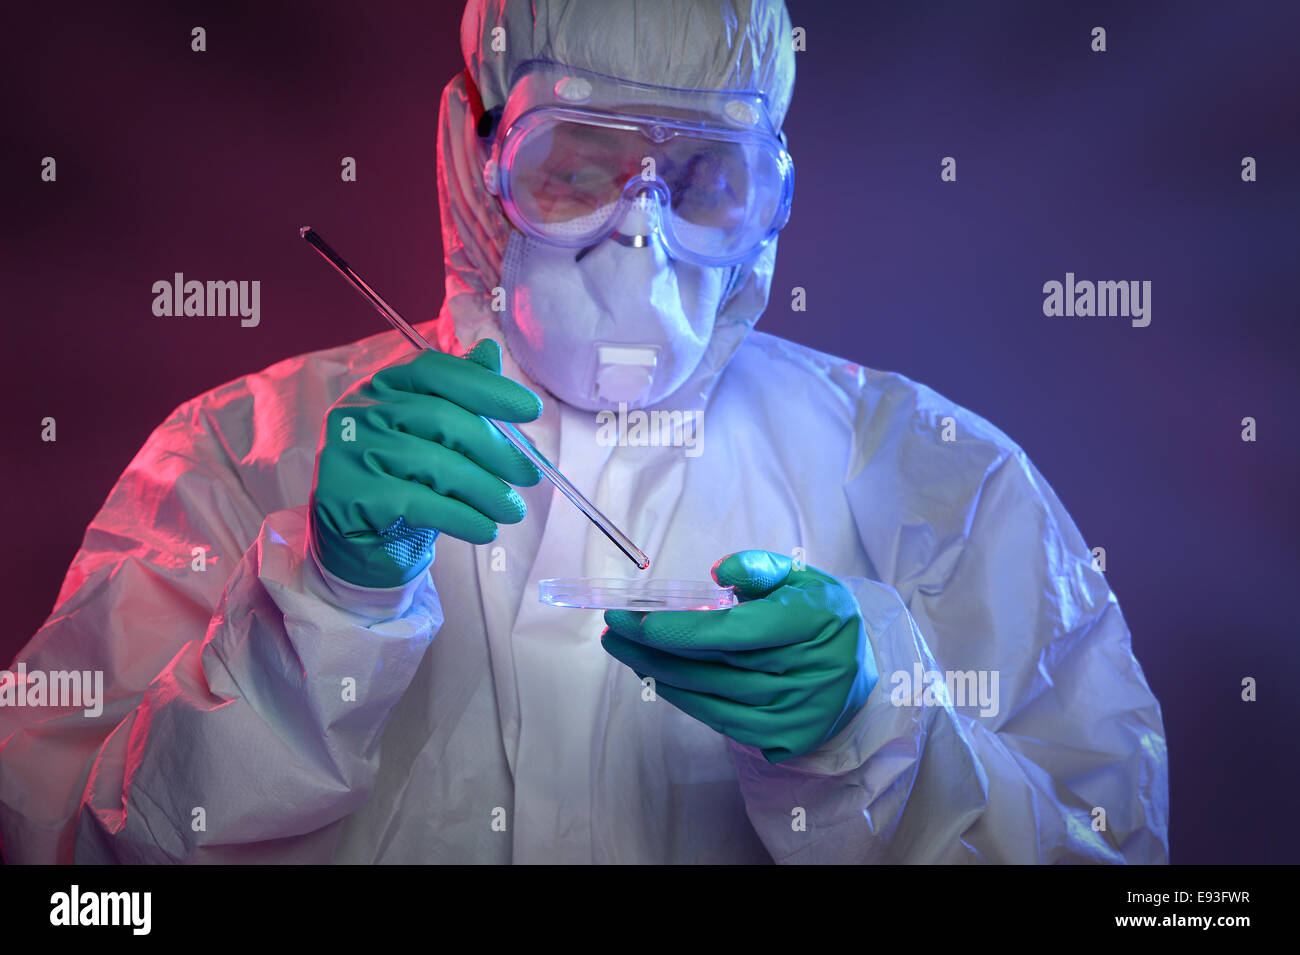 Scientist in Hazmat suit and protective gear working with virus on Petri dish Stock Photo